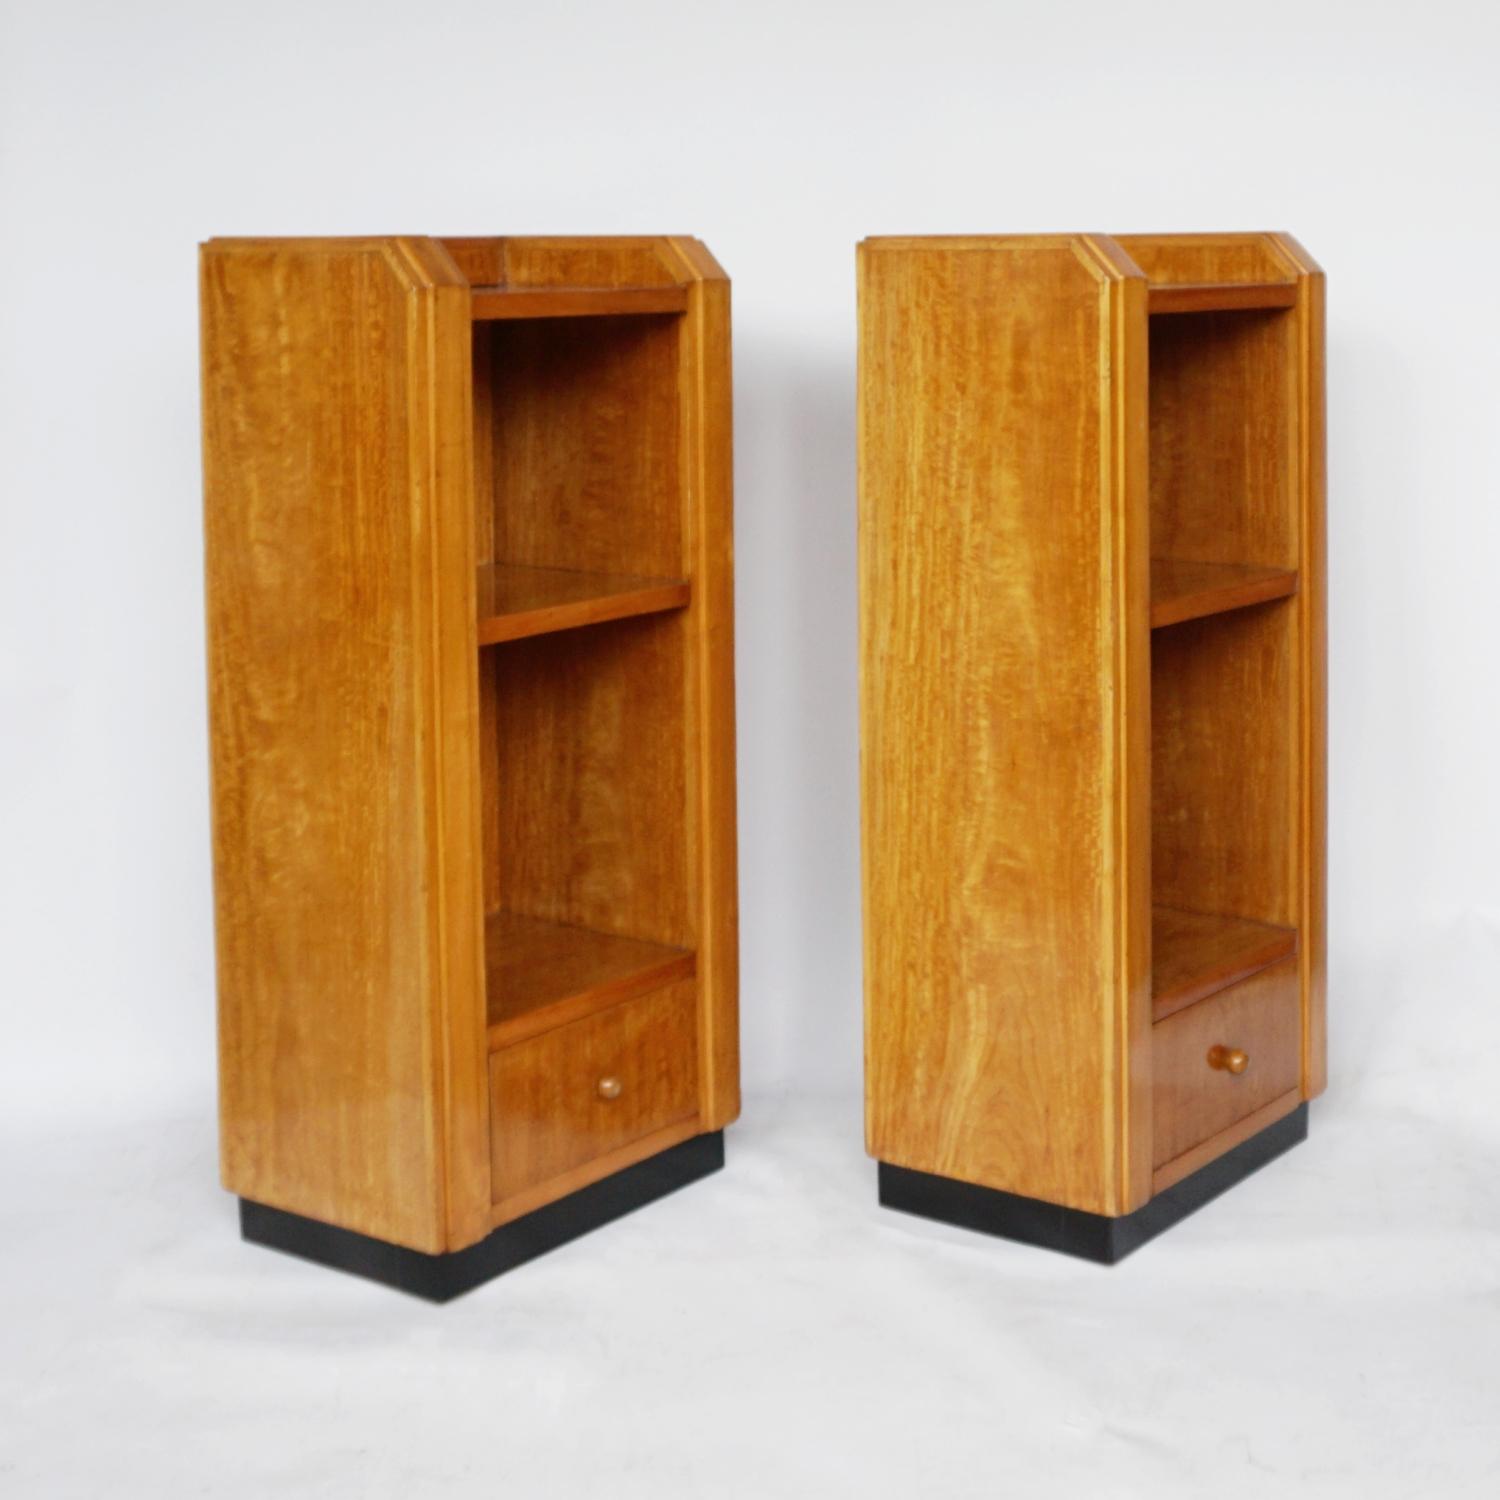 A pair of Art Deco bookcases. Satinbirch veneered with ebonised banding to base. Two upper shelves with singular lower drawer. 

Dimensions: H 93.5cm W 41.5cm D 29cm 

Origin: English

Date: Circa 1930

Item Number: 408212

All of our